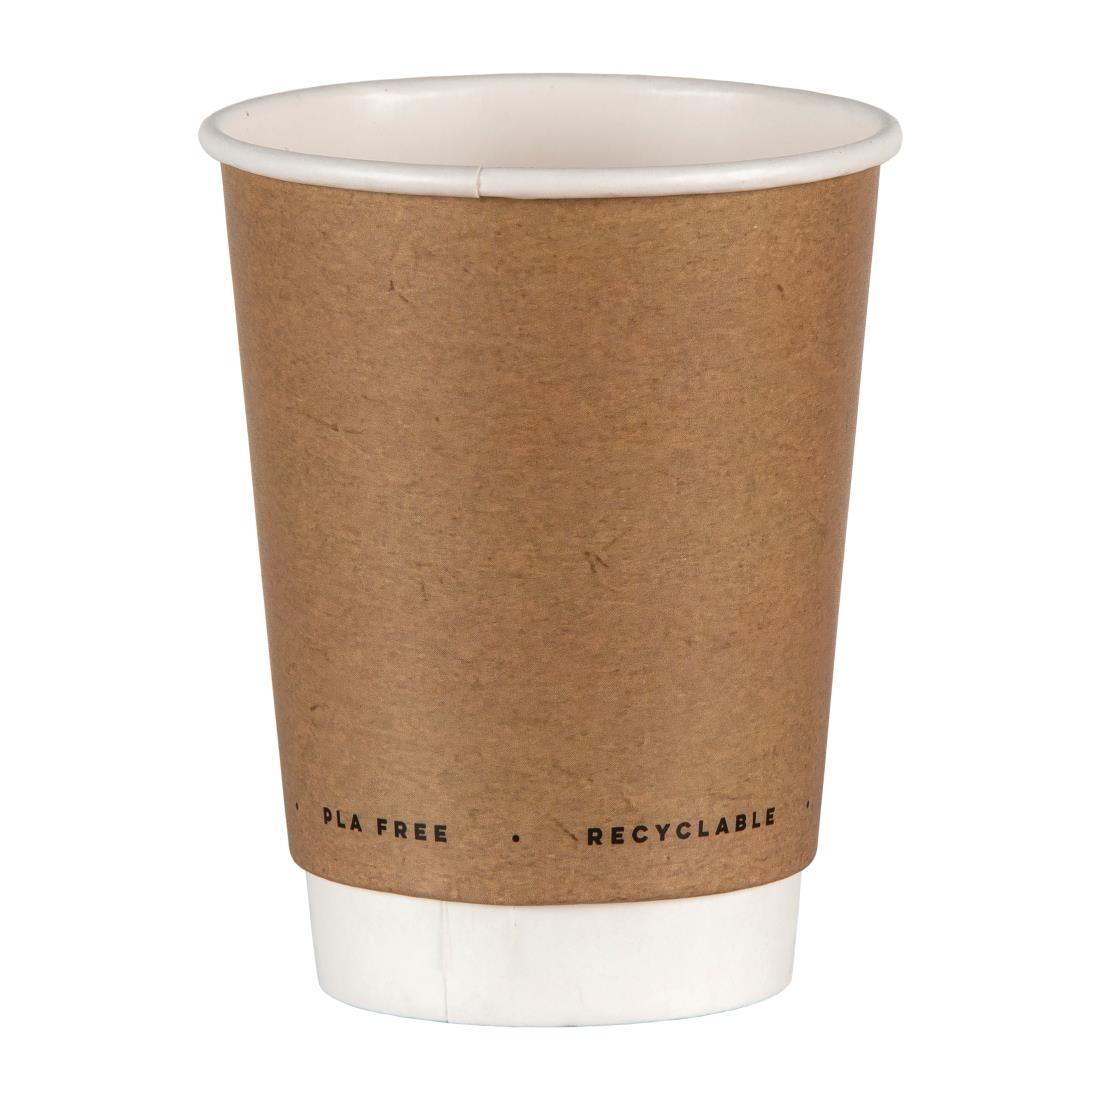 Fiesta Green Plastic-Free Compostable Hot Cups Double Wall 225ml / 8oz x 500 - FB951  - 1